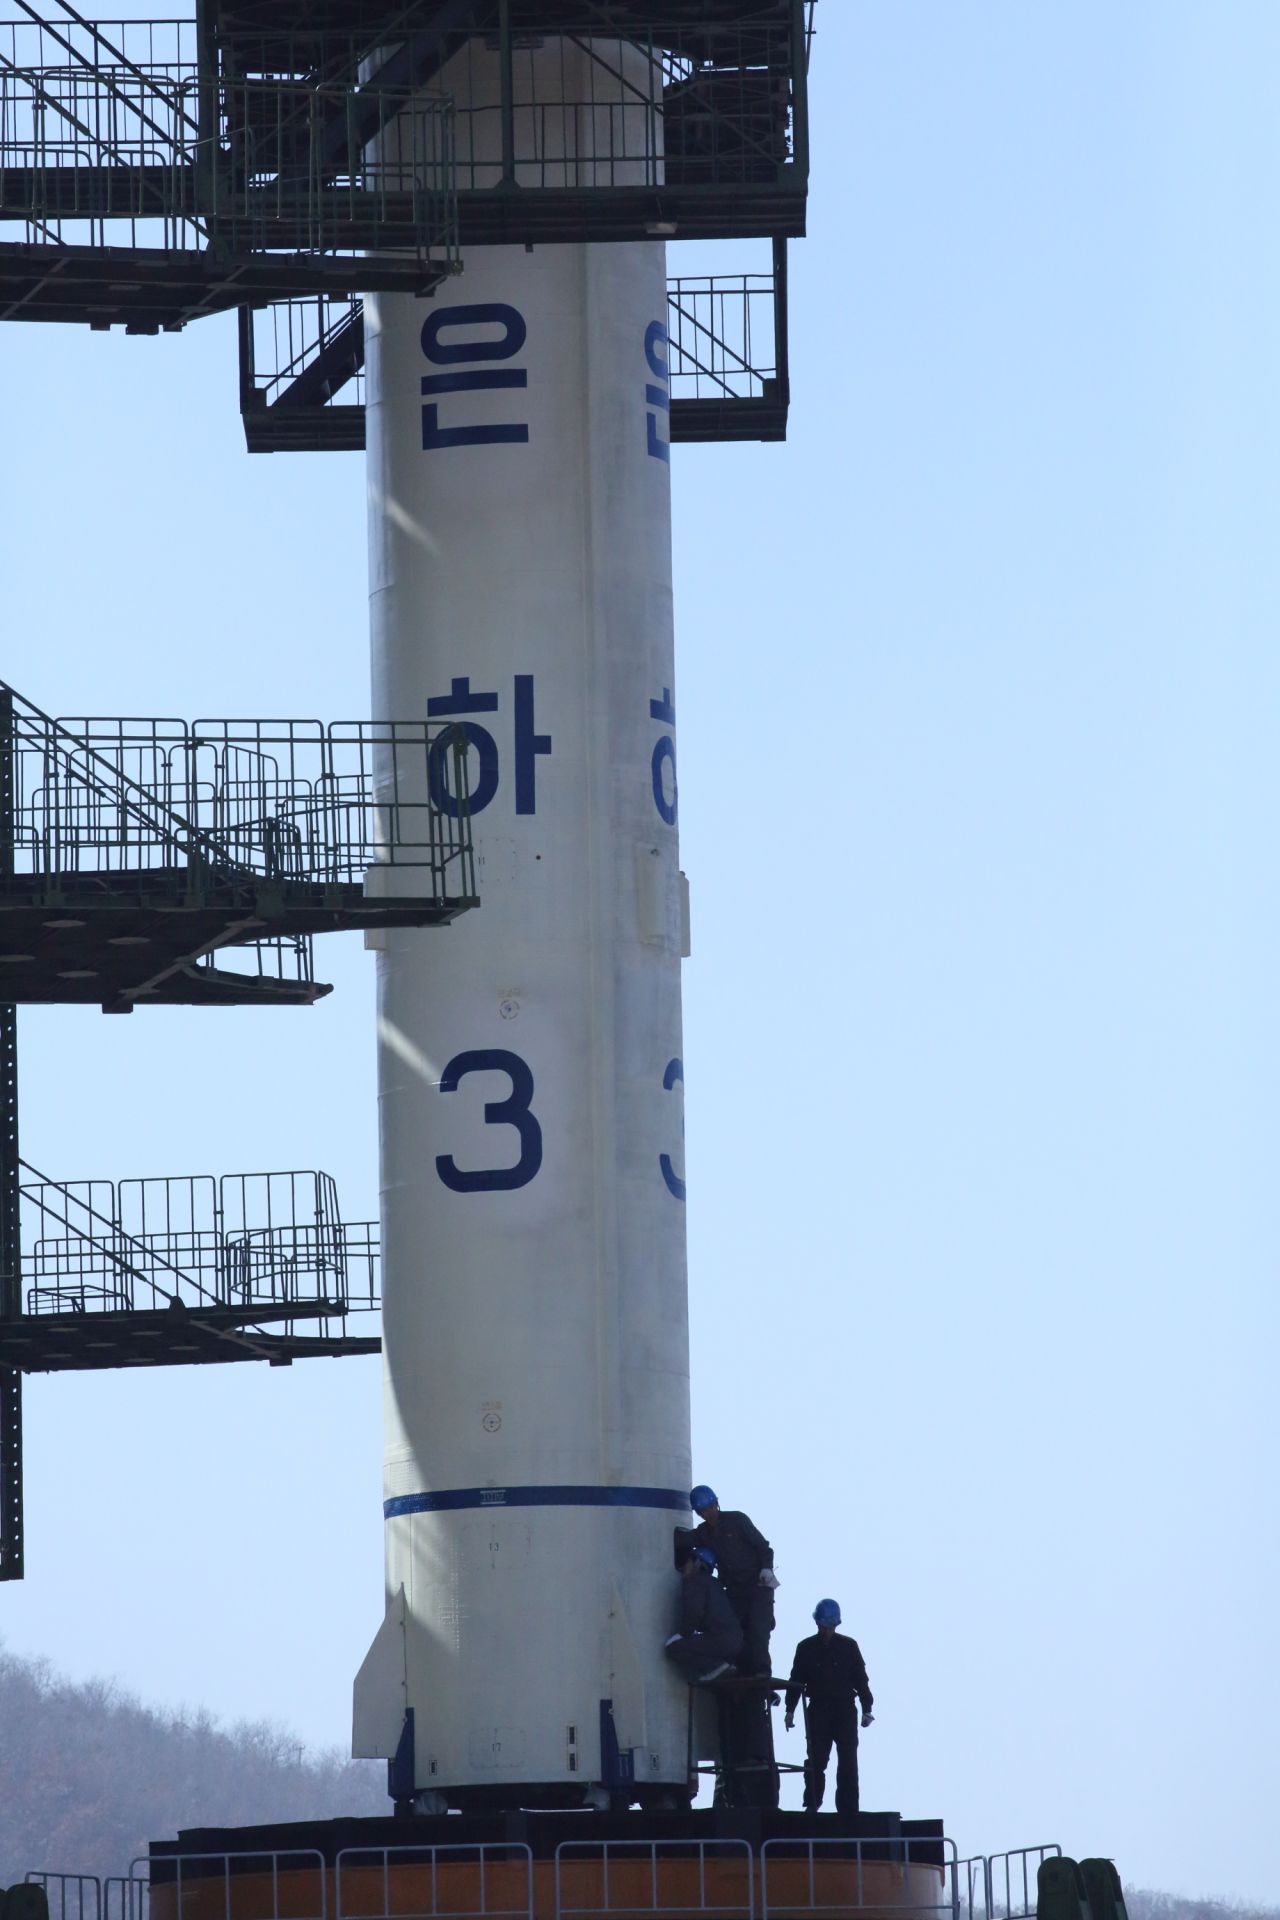 Technicians check the North Korean satellite launch vehicle Unha-3 on the launch pad at the Sohae Satellite Launching Center on April 8.